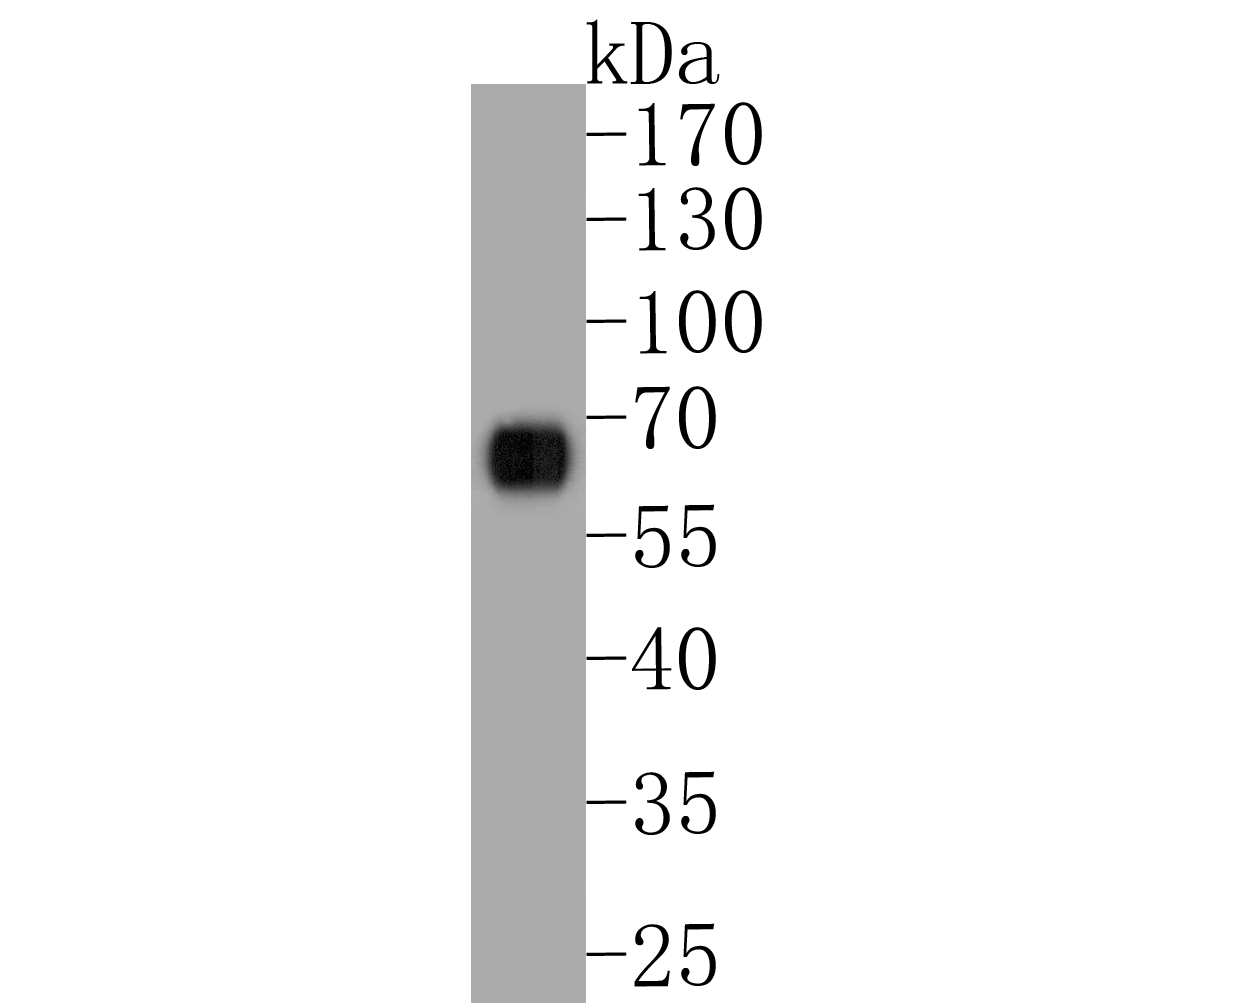 Western blot analysis of GSDMC on human stomach tissue lysates. Proteins were transferred to a PVDF membrane and blocked with 5% BSA in PBS for 1 hour at room temperature. The primary antibody (ER1902-22, 1/1000) was used in 5% BSA at room temperature for 2 hours. Goat Anti-Rabbit IgG - HRP Secondary Antibody (HA1001) at 1:5,000 dilution was used for 1 hour at room temperature.